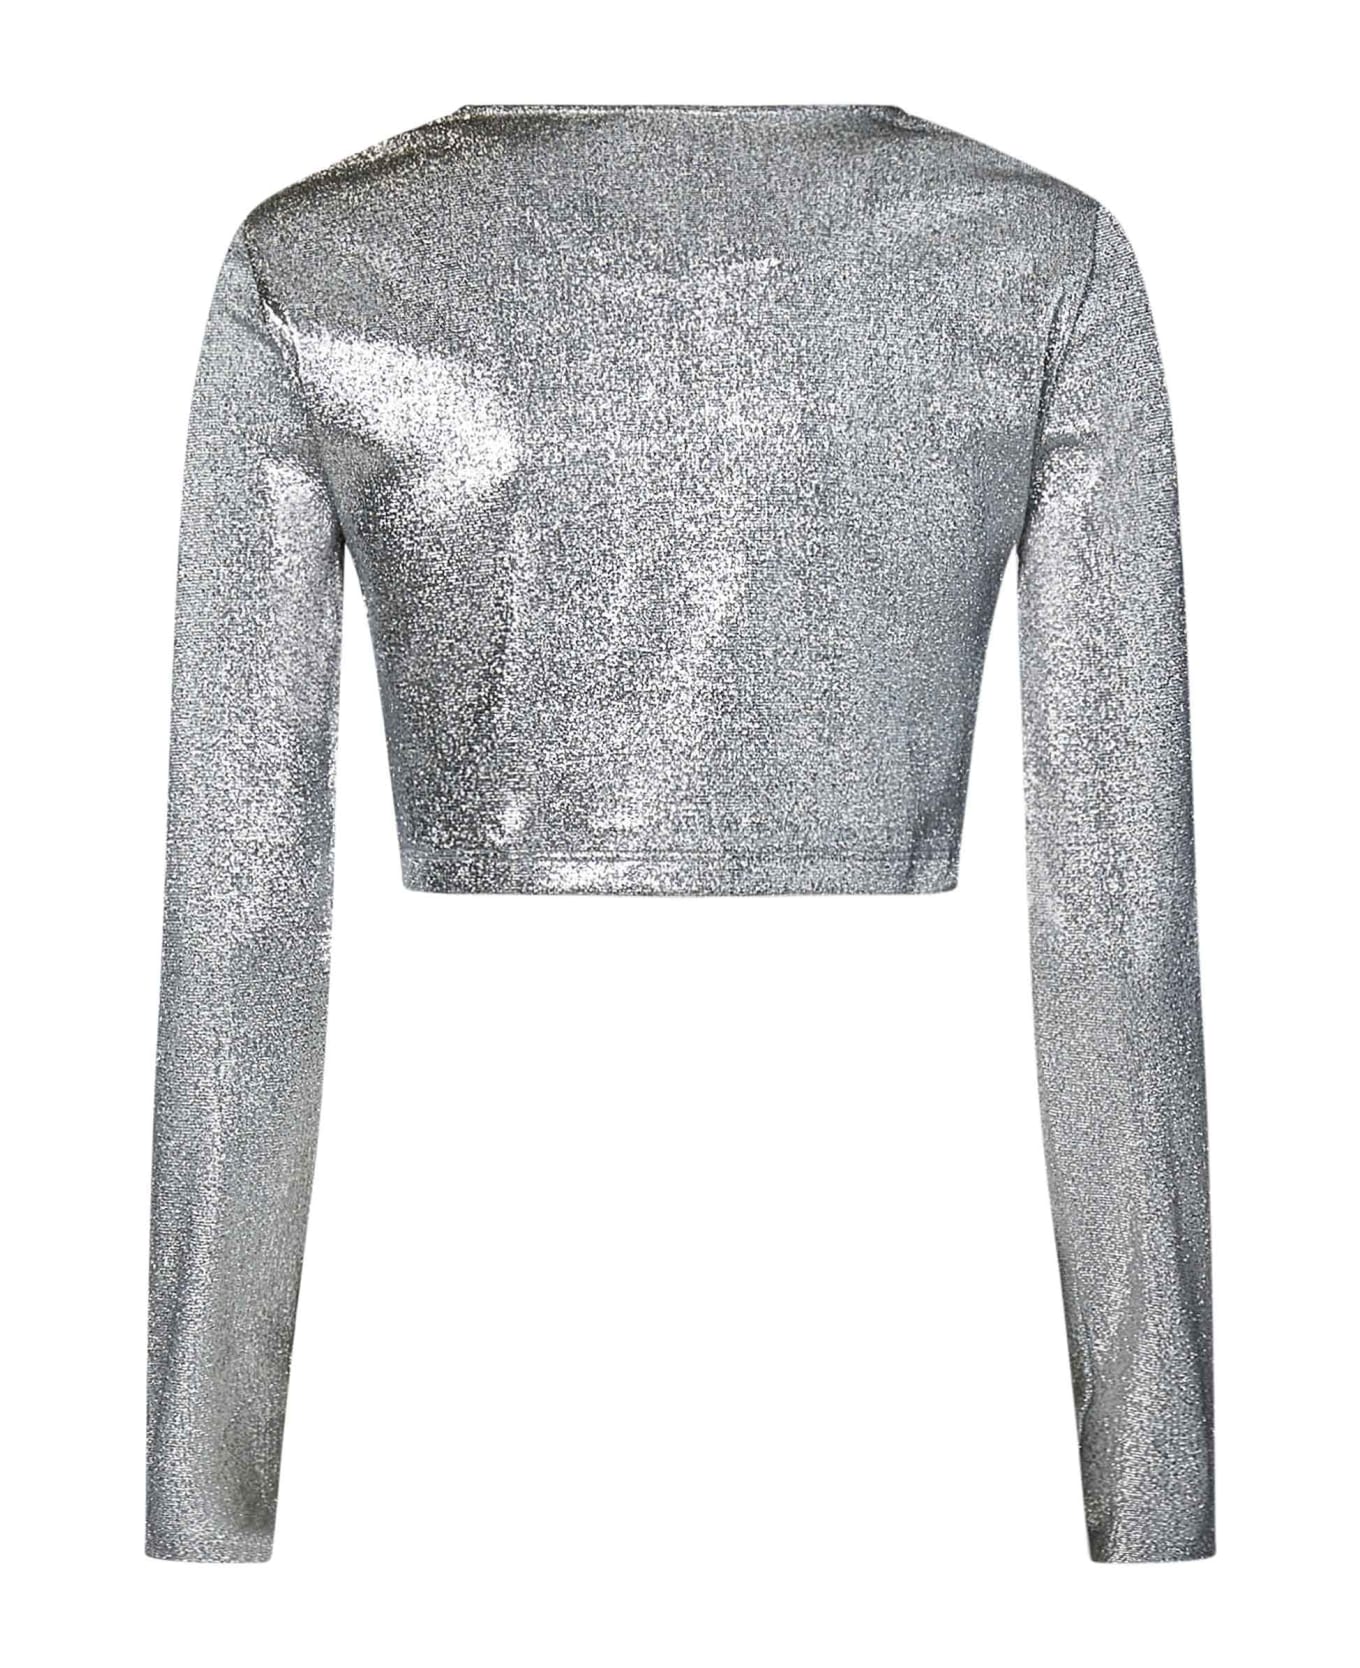 Paco Rabanne Top - Silver